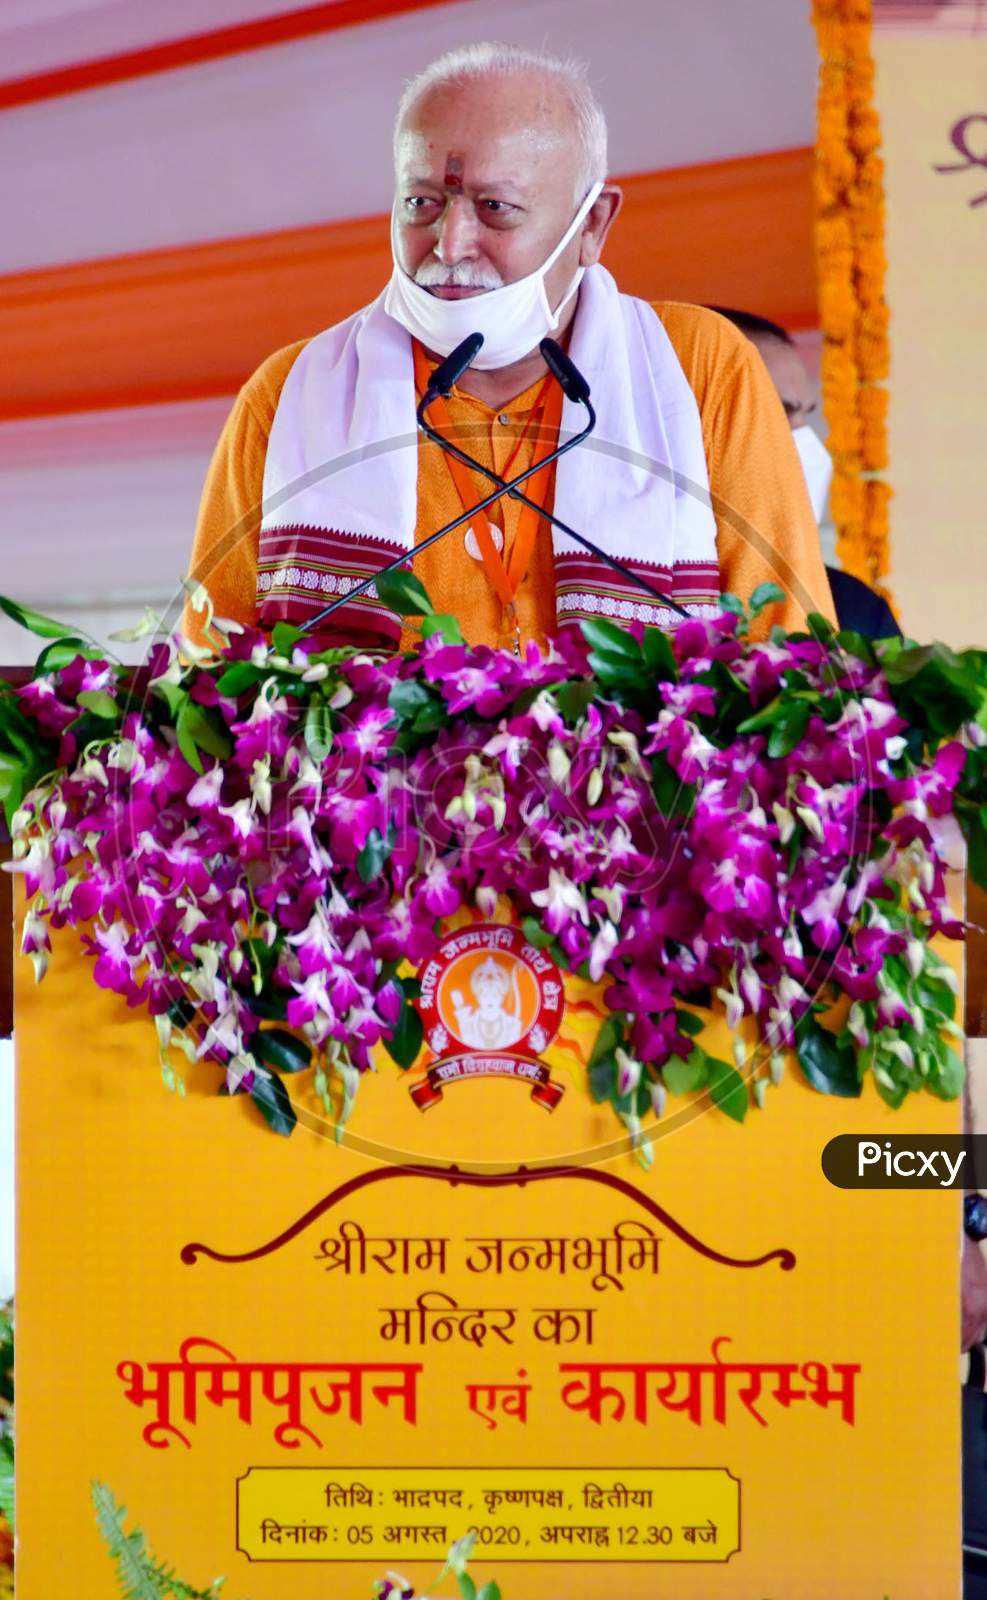 Rashtriya Swayamsevak Sangh (RSS) chief Mohan Bhagwat addresses people after the foundation laying ceremony for the Hindu Lord Ram's temple, in Ayodhya, India, August 5, 2020.